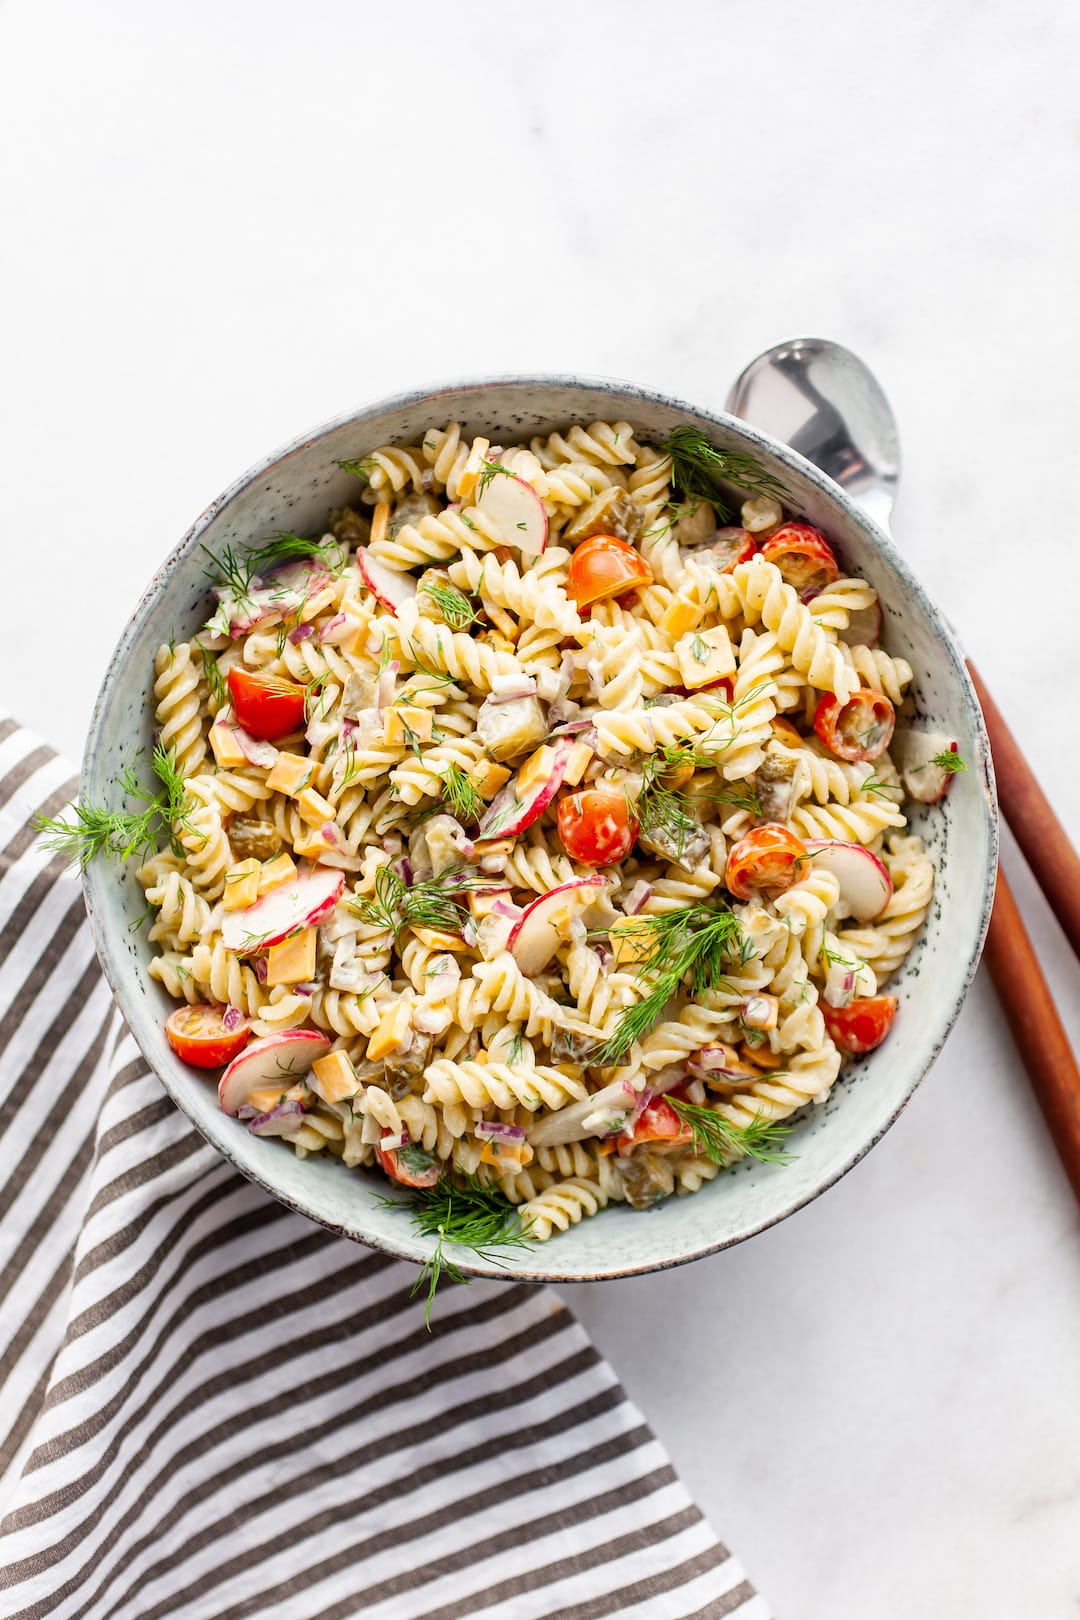 Colourful & Crunchy Healthy Dill Pickle Pasta Salad